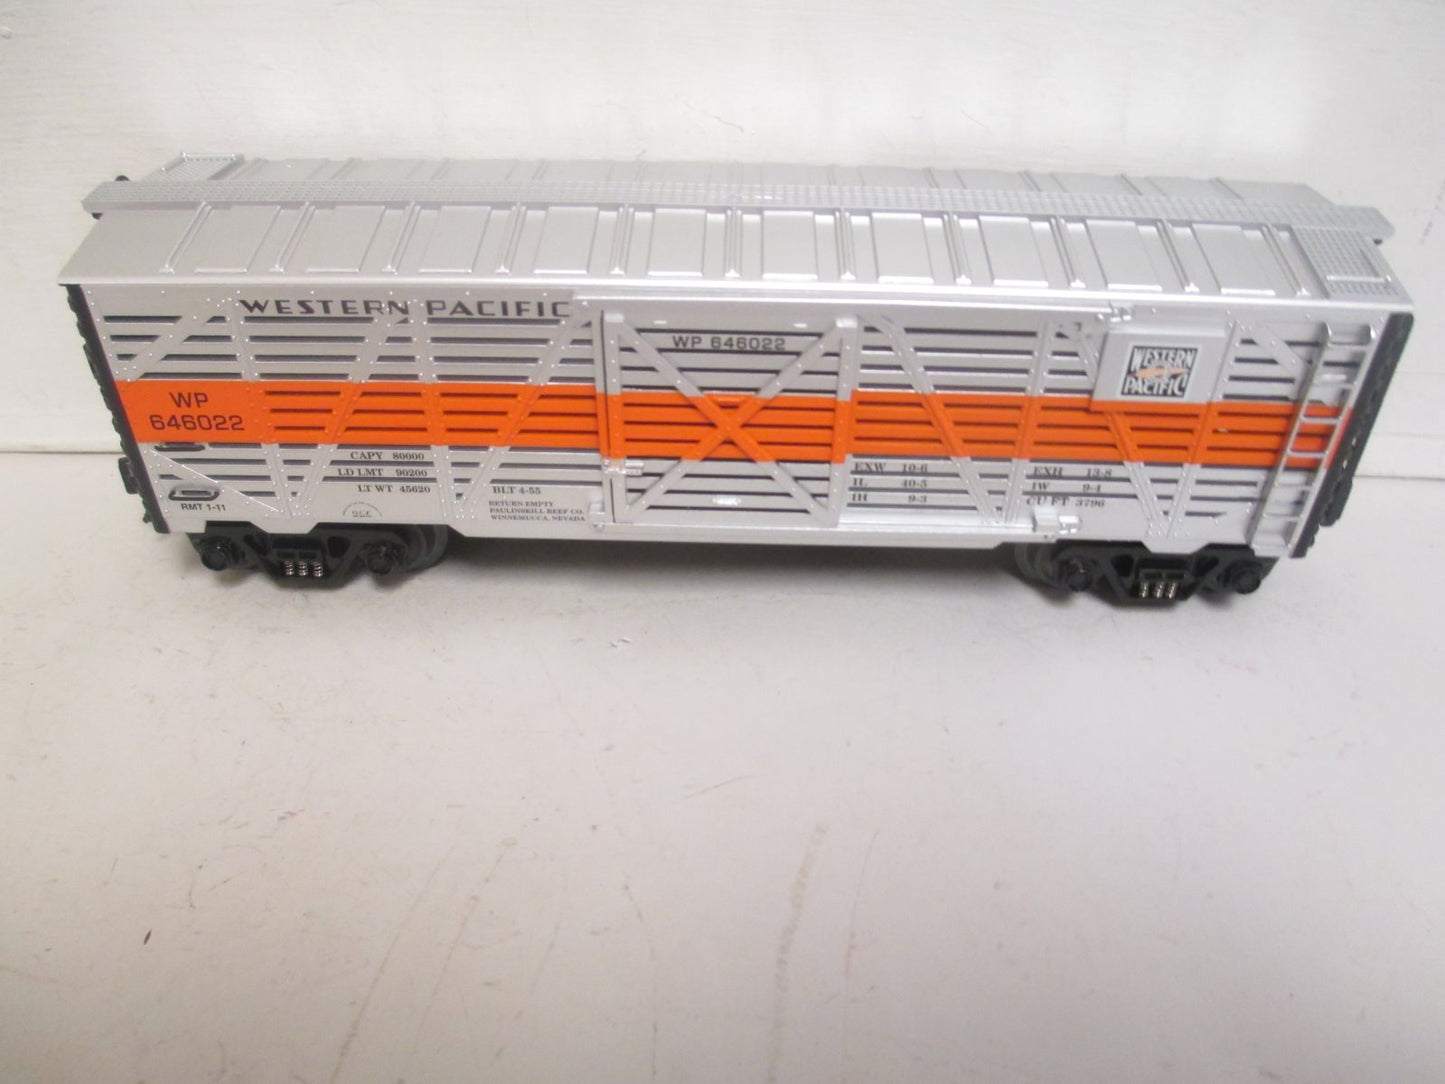 O-Line 111 Western Pacific Stock Car #646022